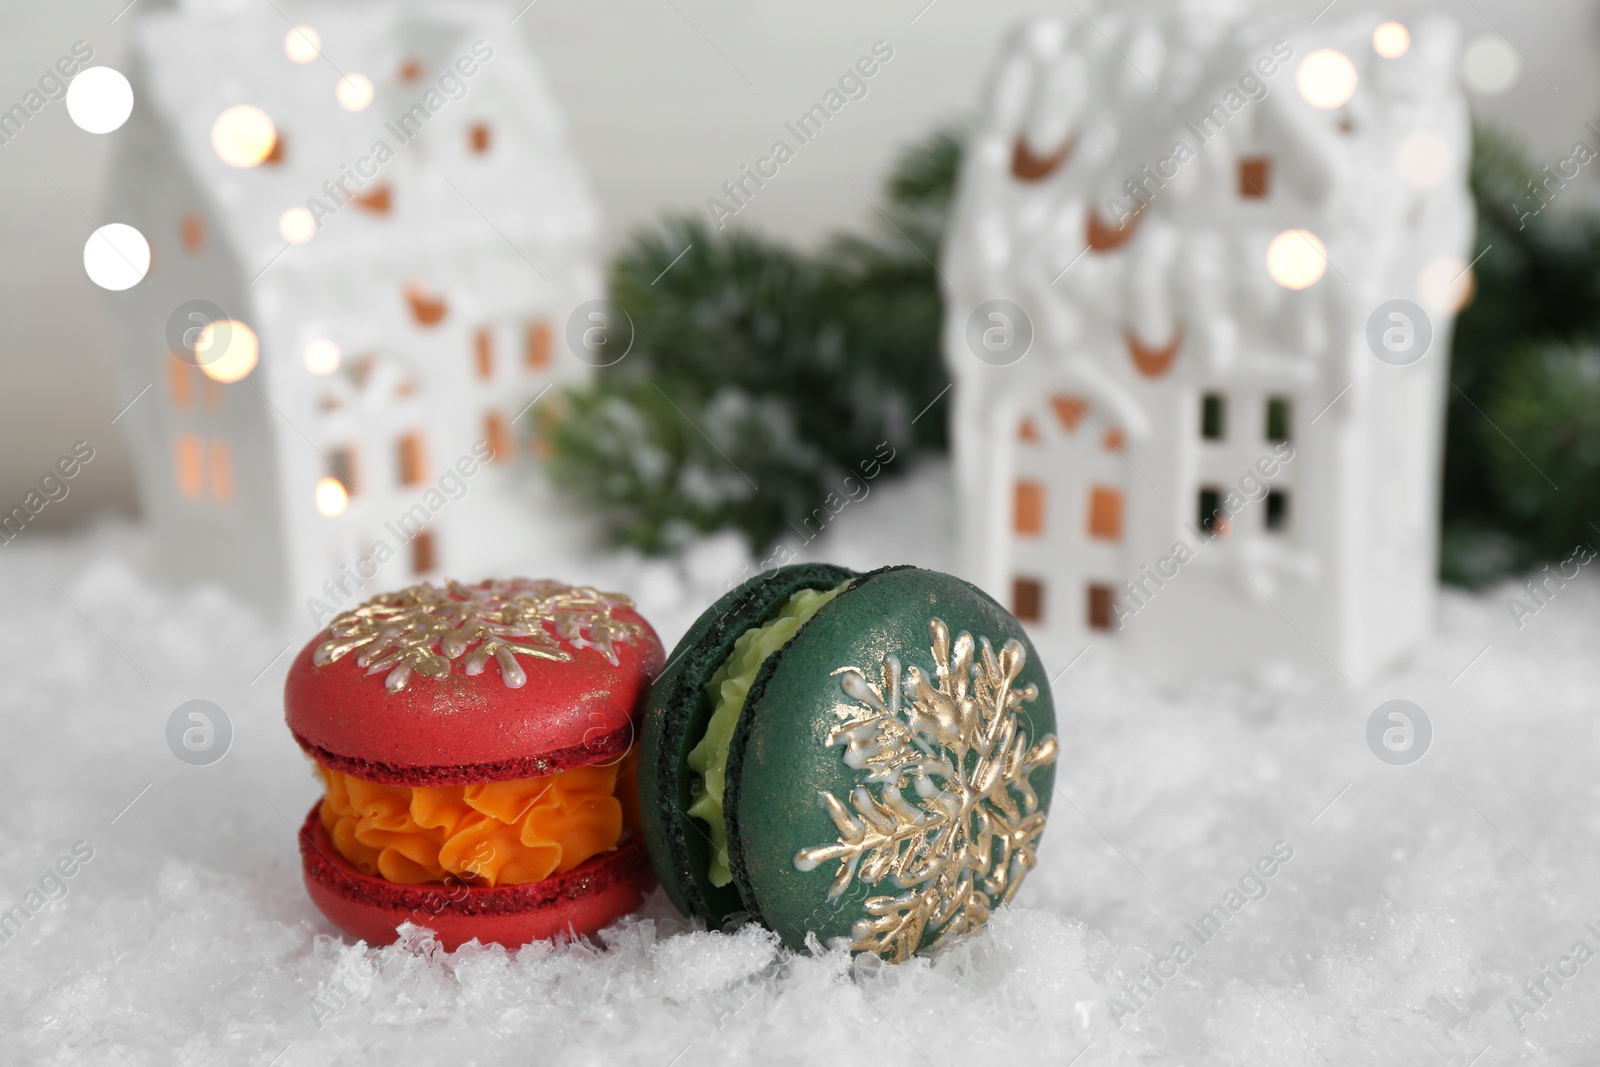 Photo of Different decorated Christmas macarons on table with artificial snow, closeup